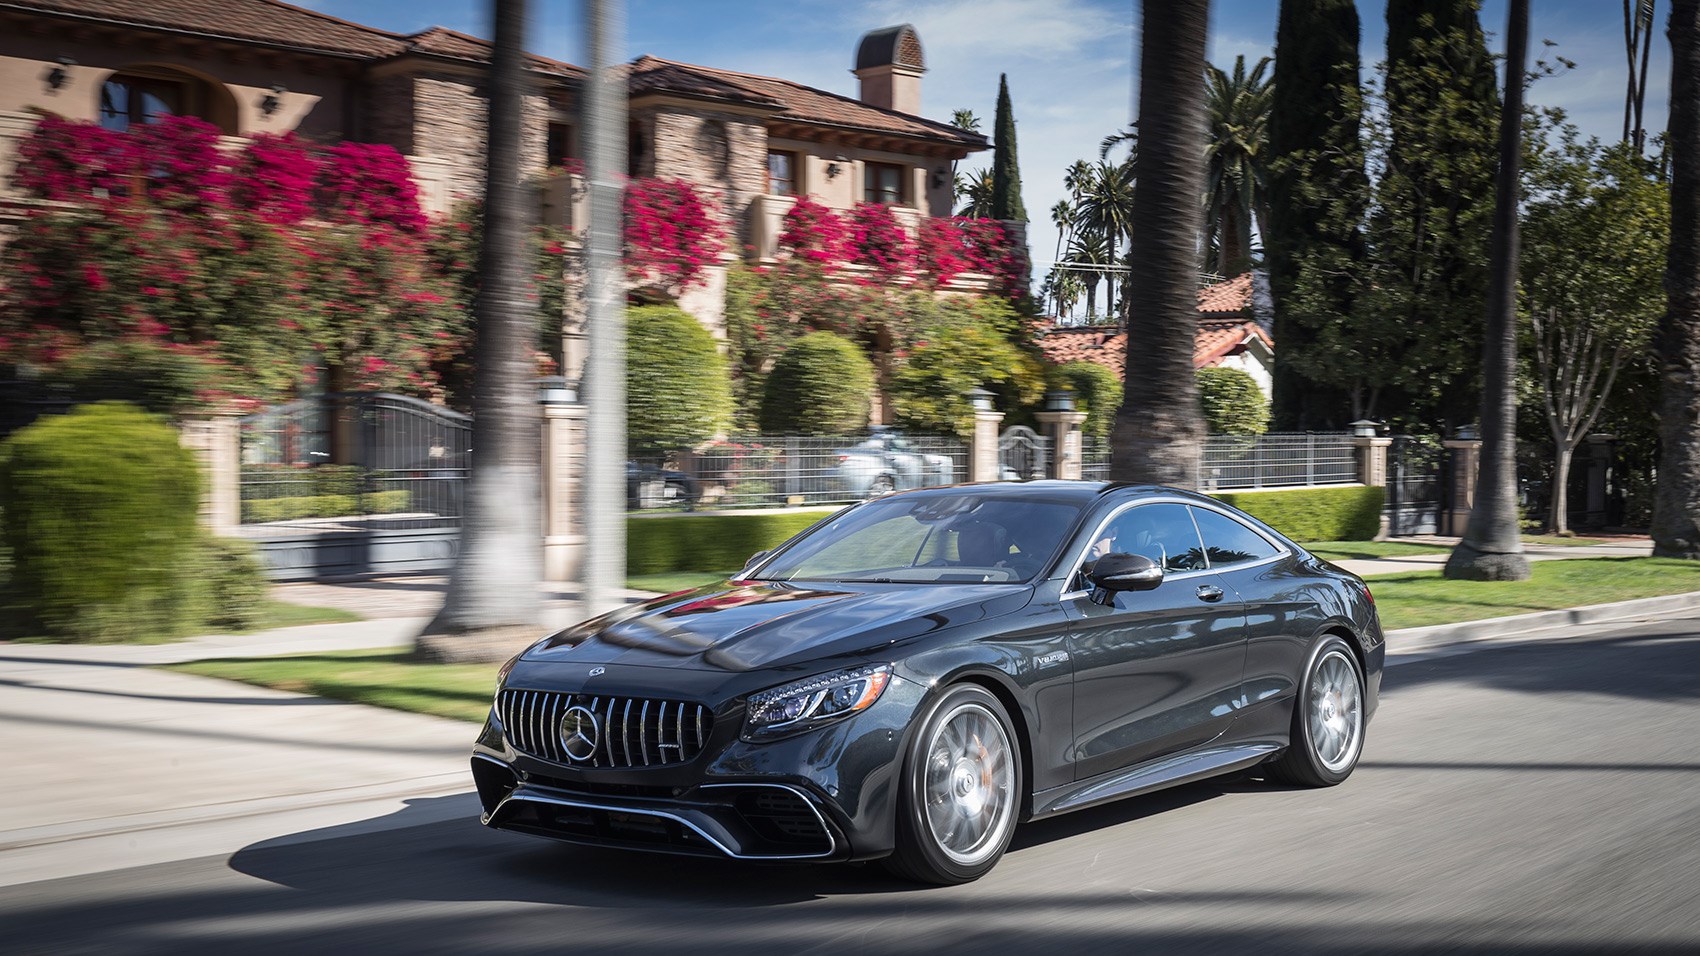 Mercedes-AMG S63 Coupe review